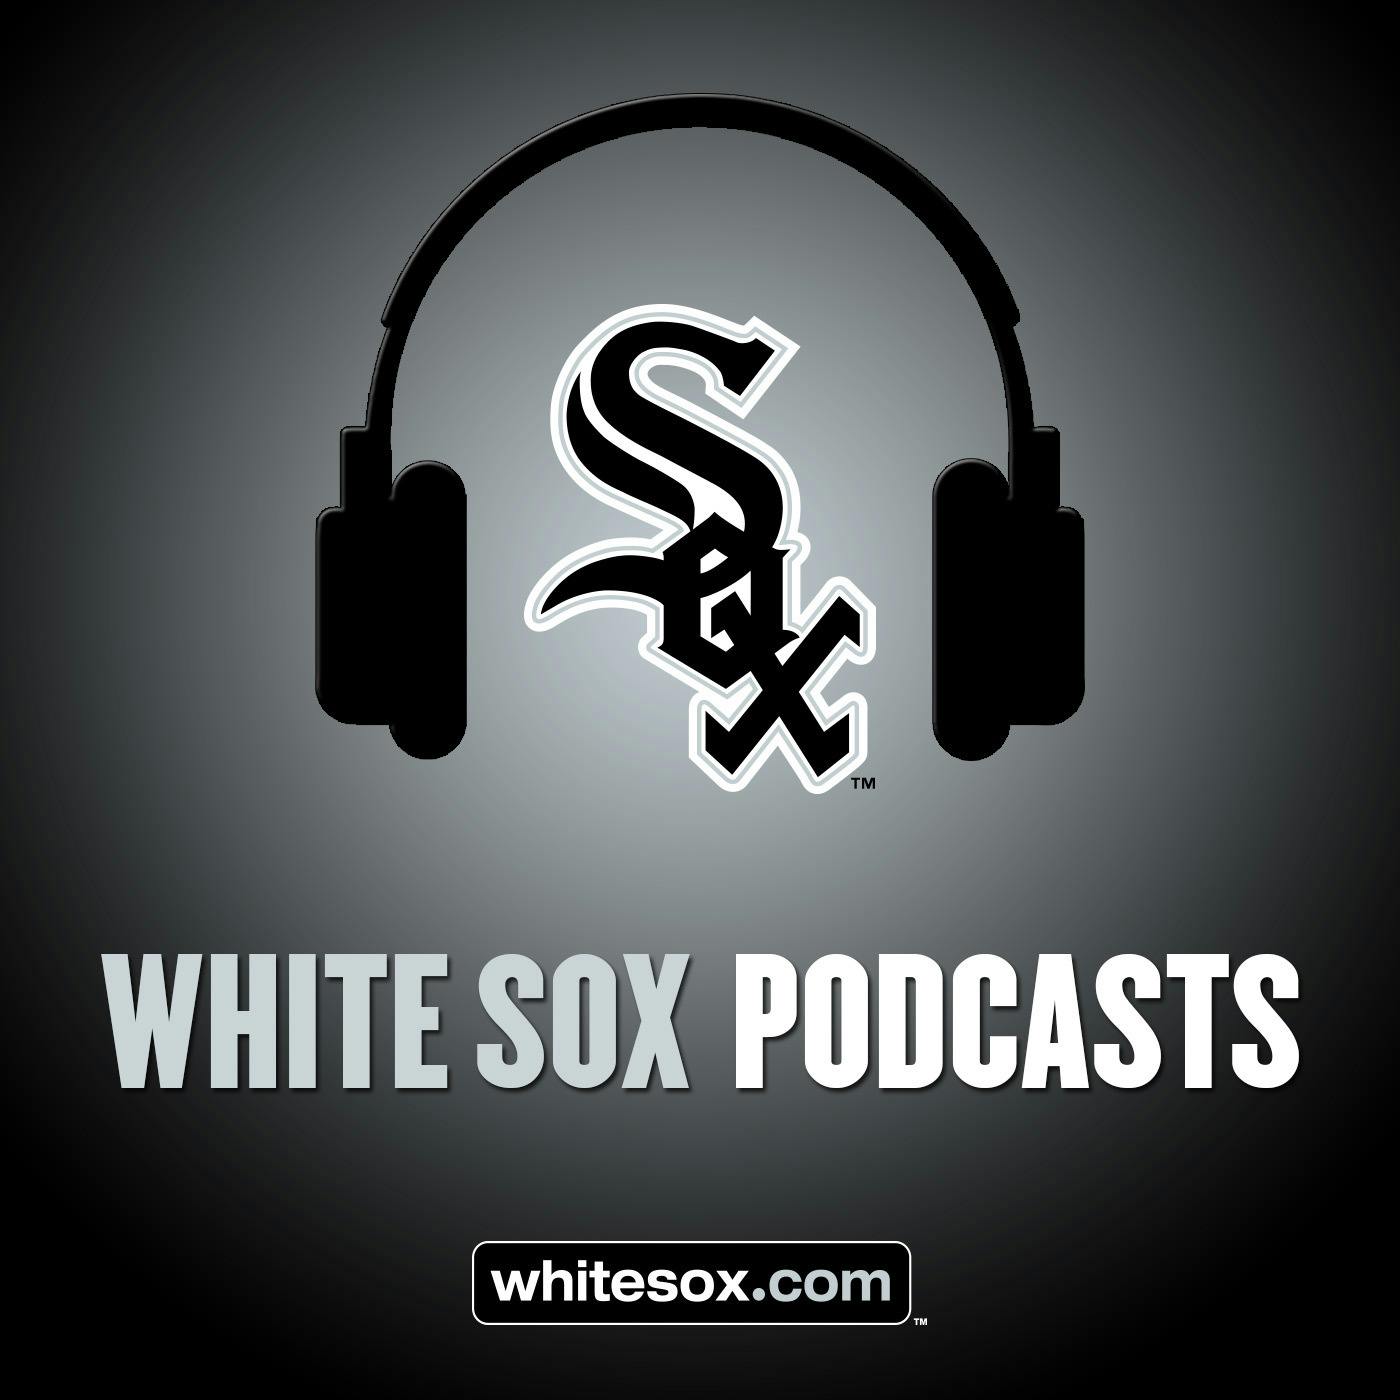 2/5/19: White Sox Extras | Latest with Machado and Harper